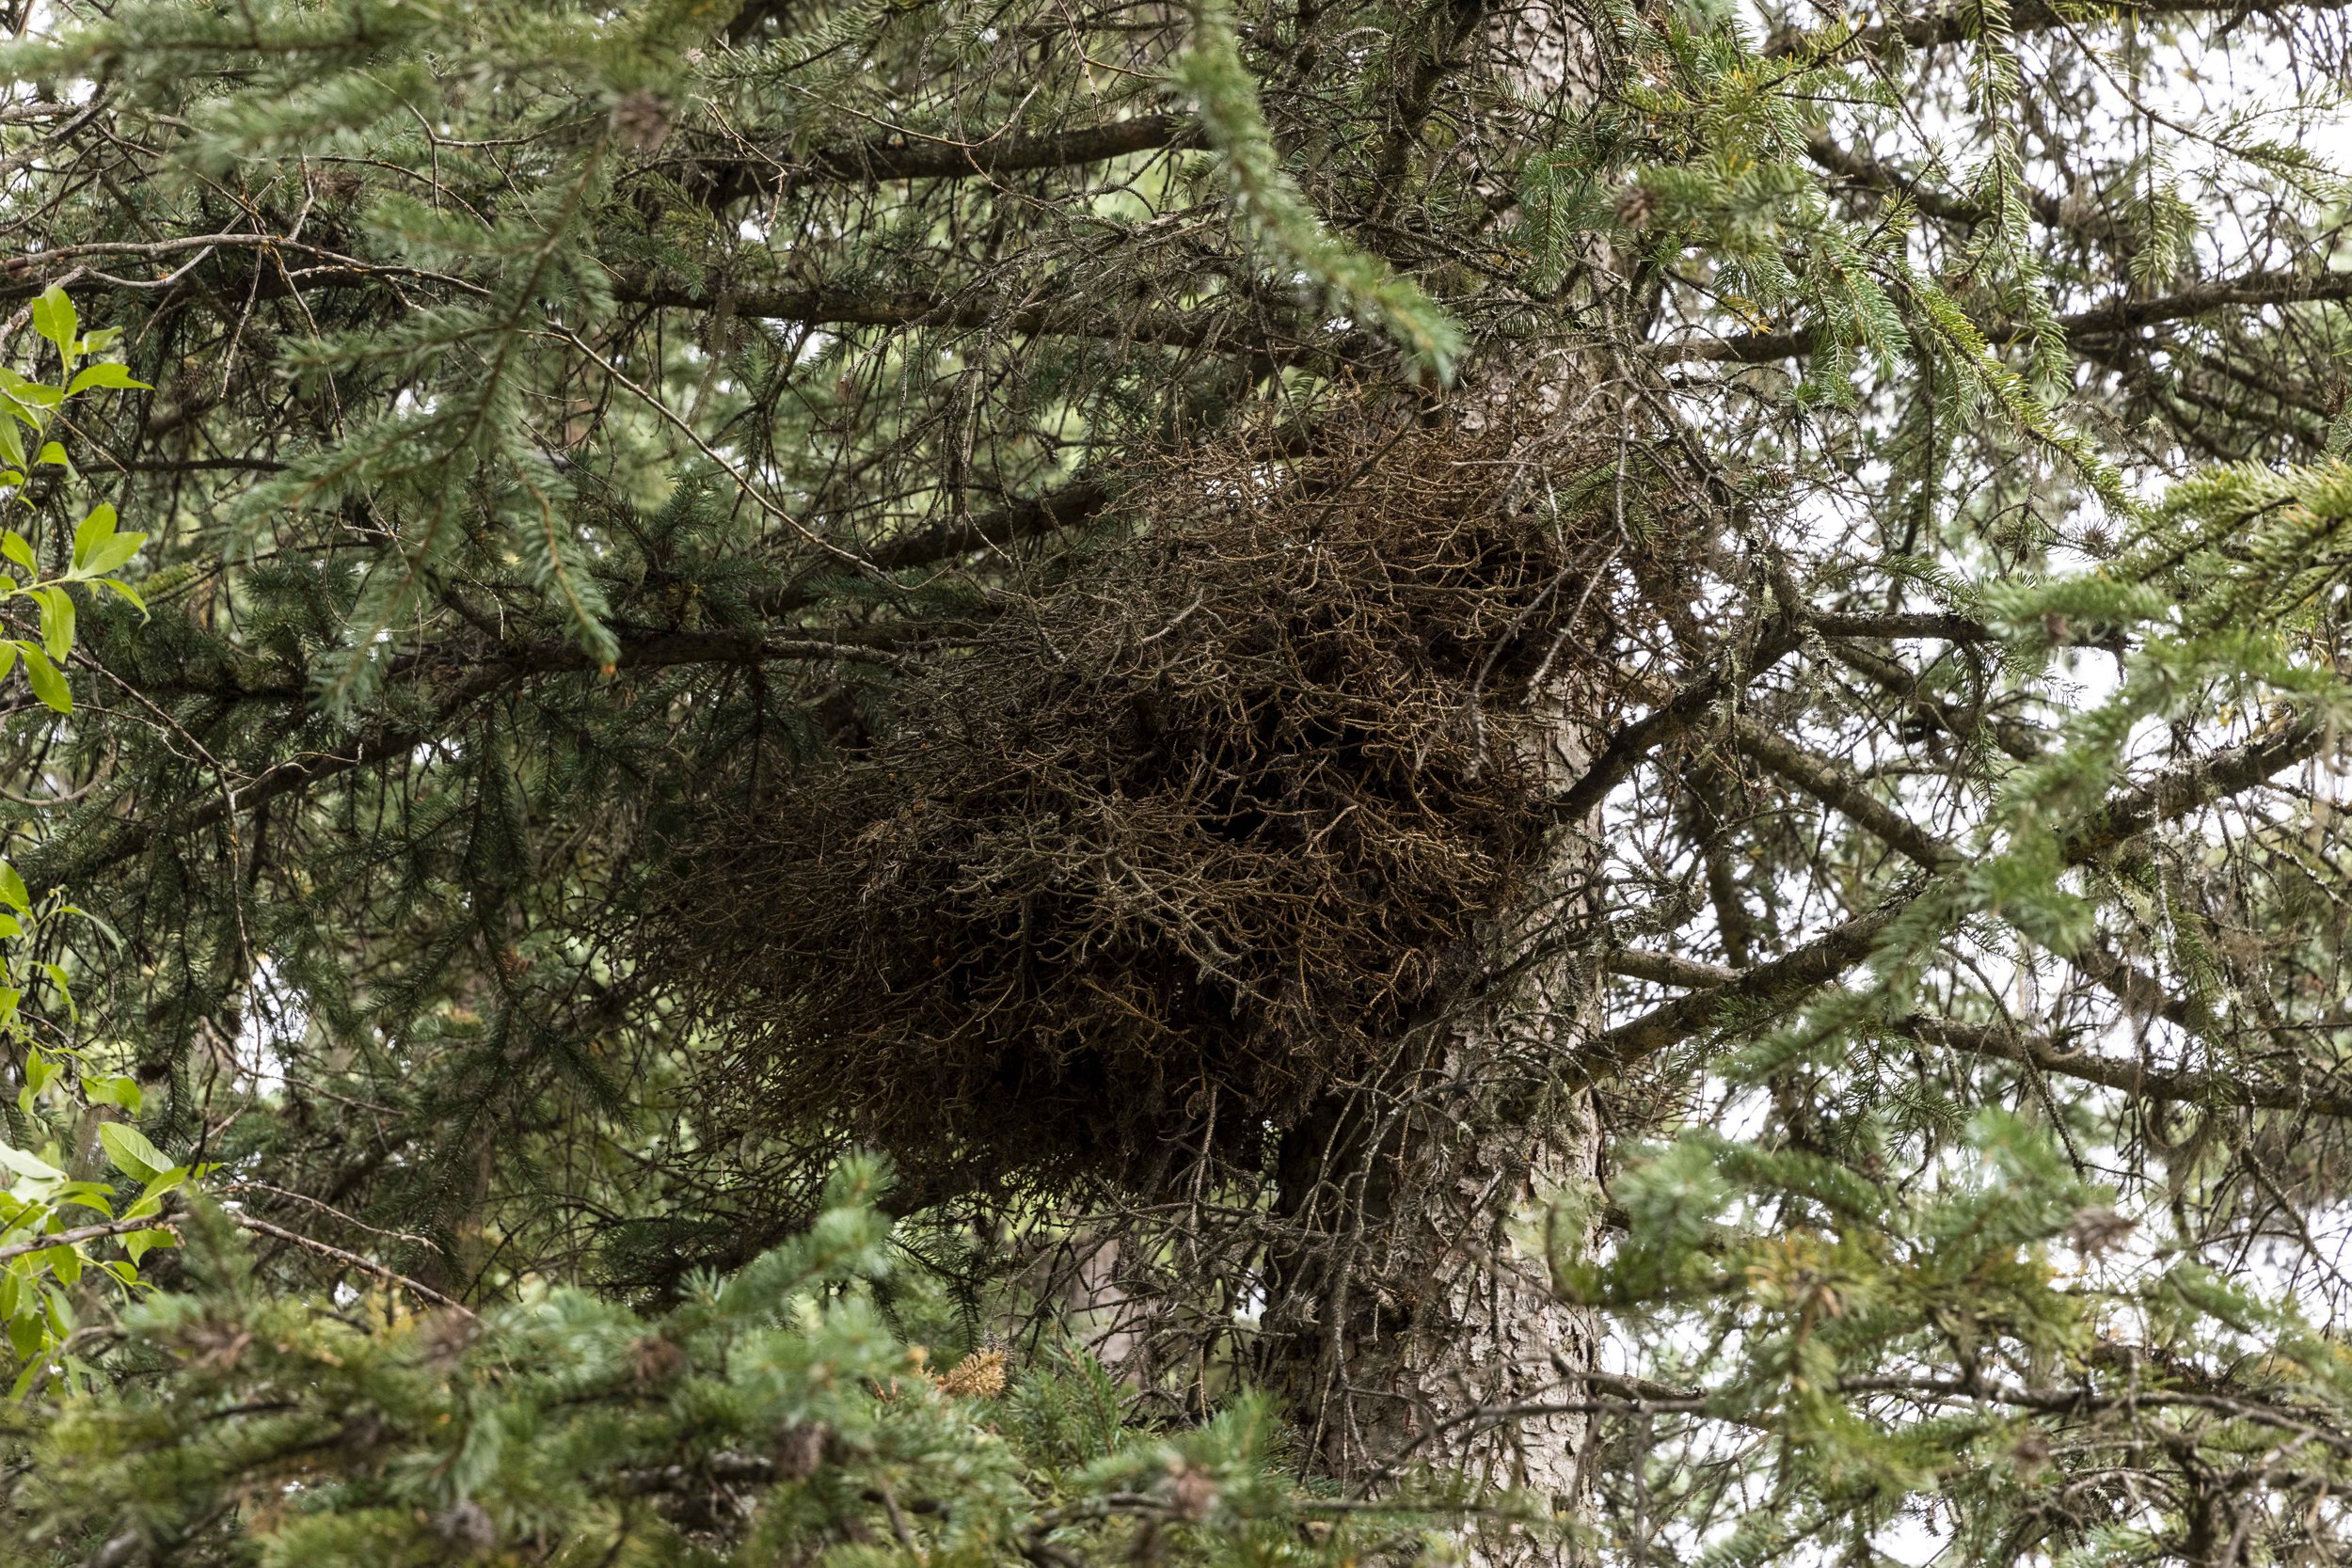  Growths such as this in a spruce tree are important habitat features for fishers who use them for nests and hunting perches. 